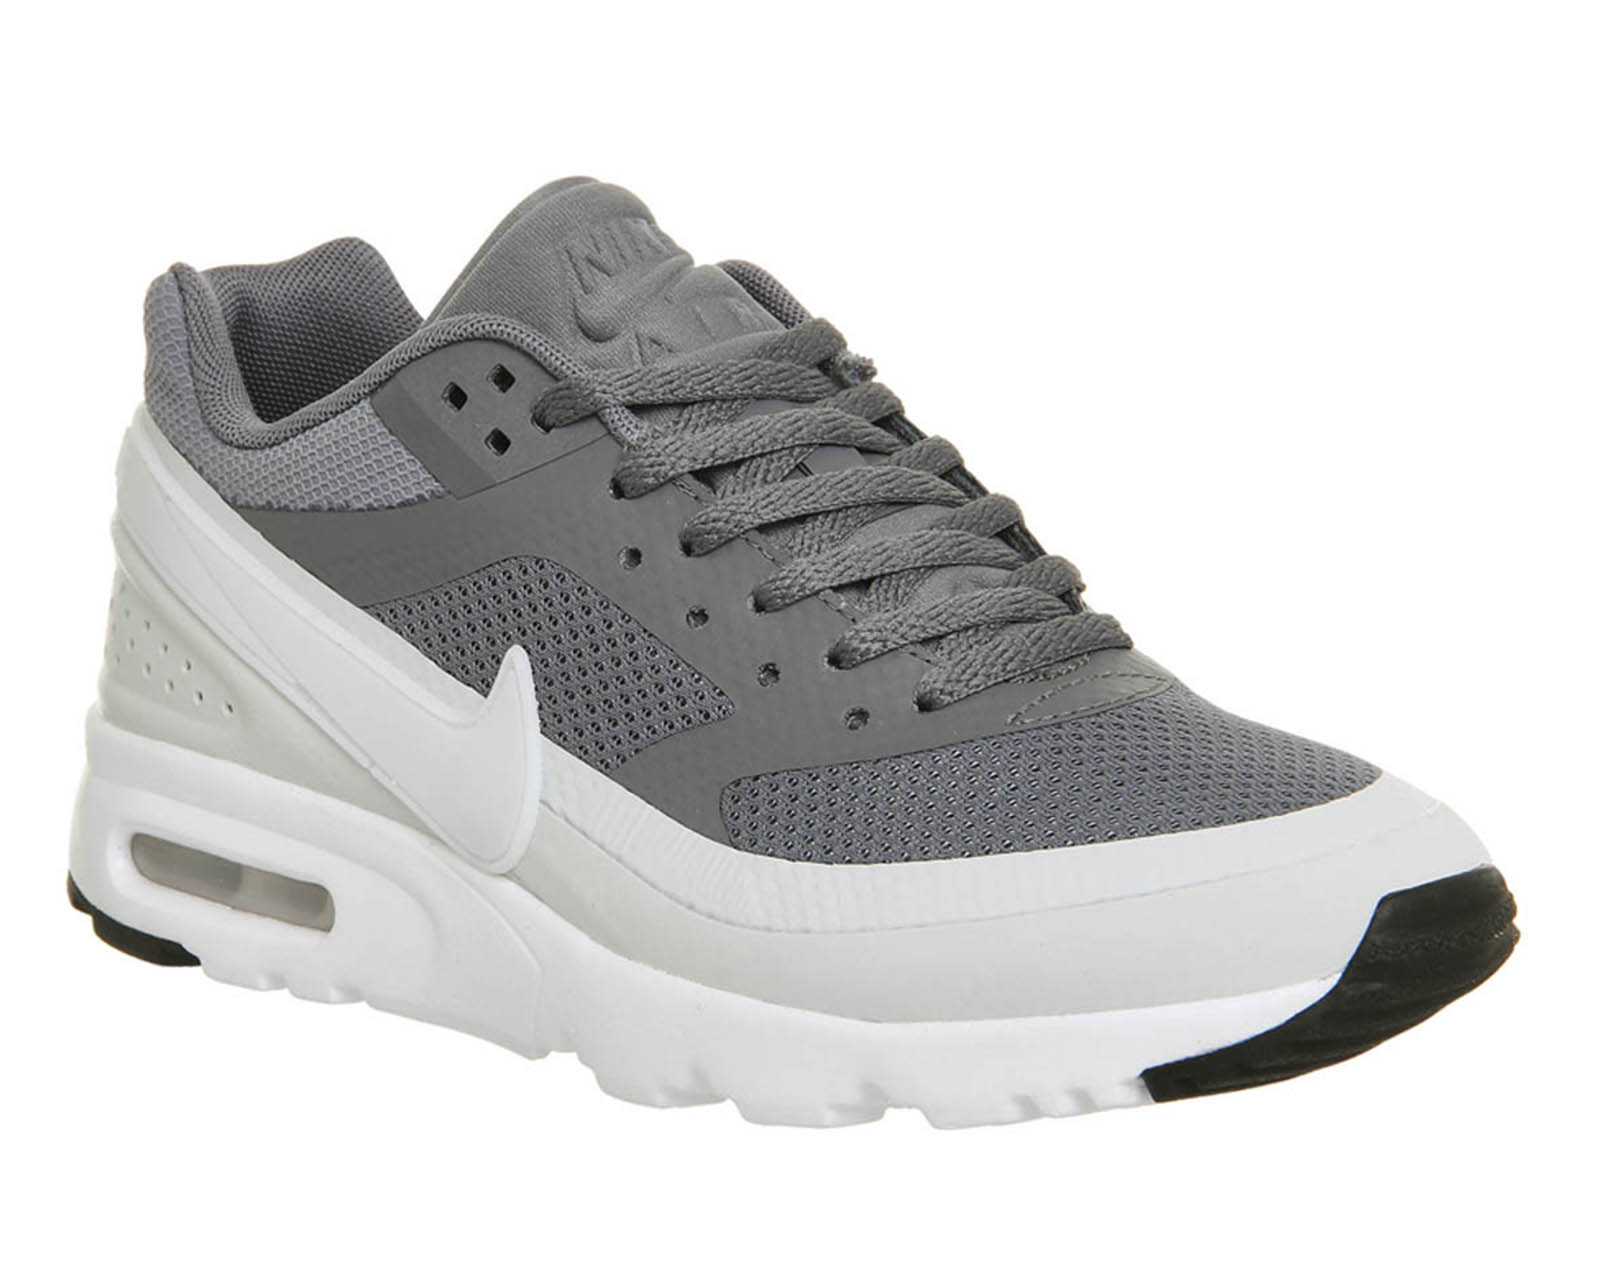 Nike Air Max Bw Ultra Cool Grey White - Hers trainers